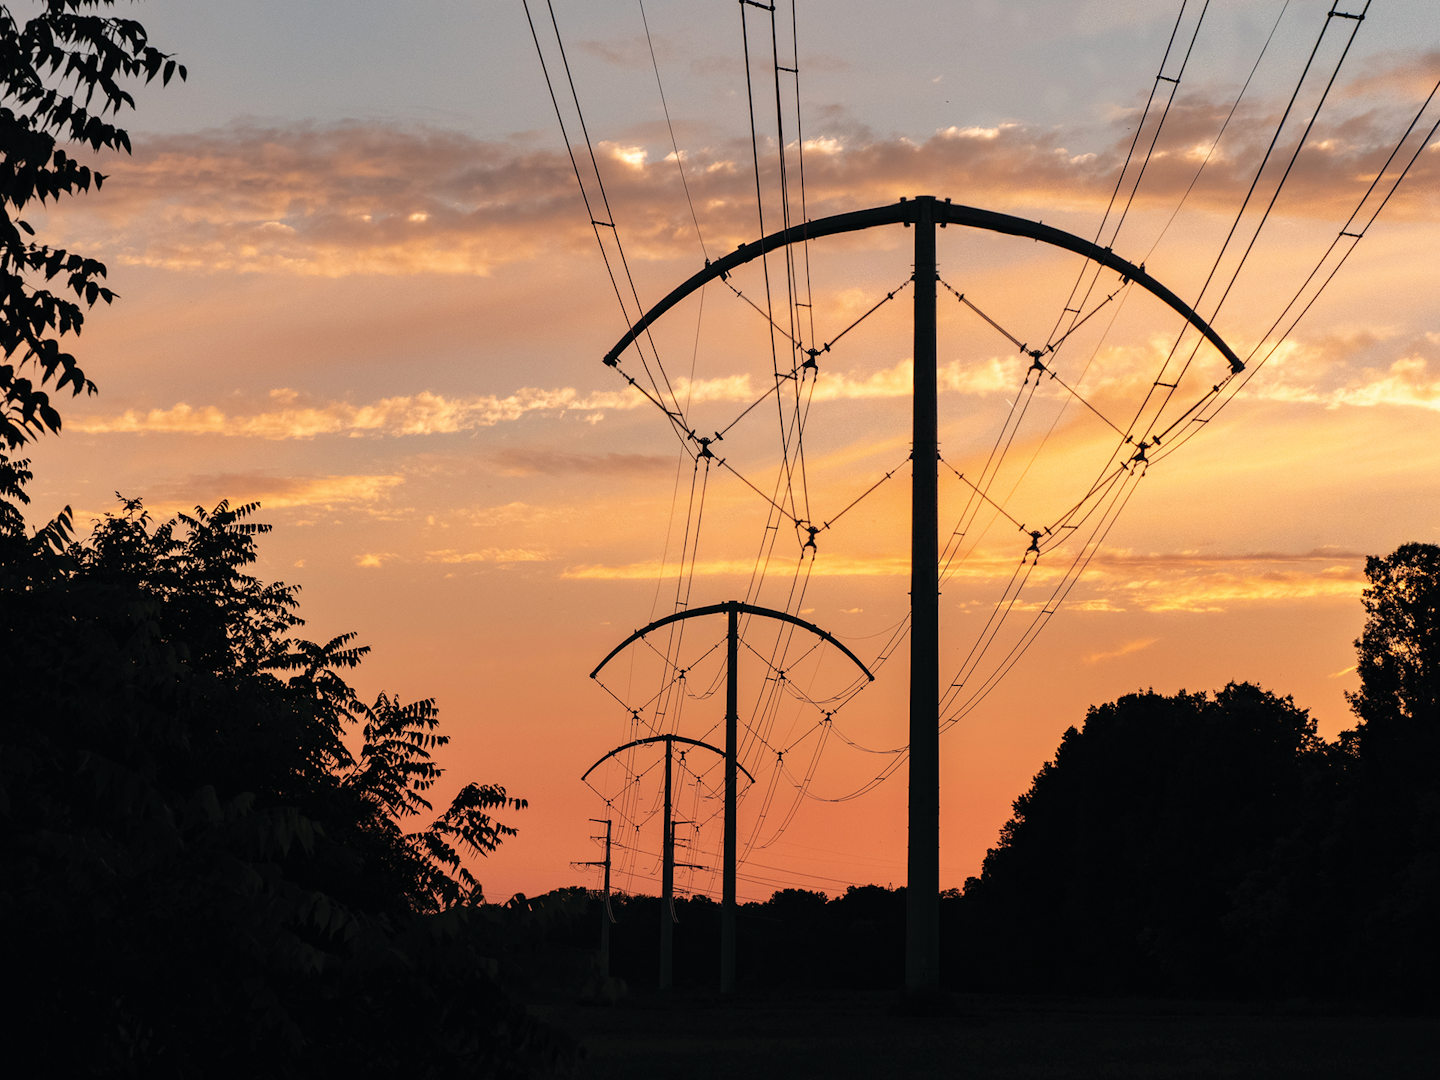 BOLD is a compact, high-capacity transmission line designed for increased power transfer.